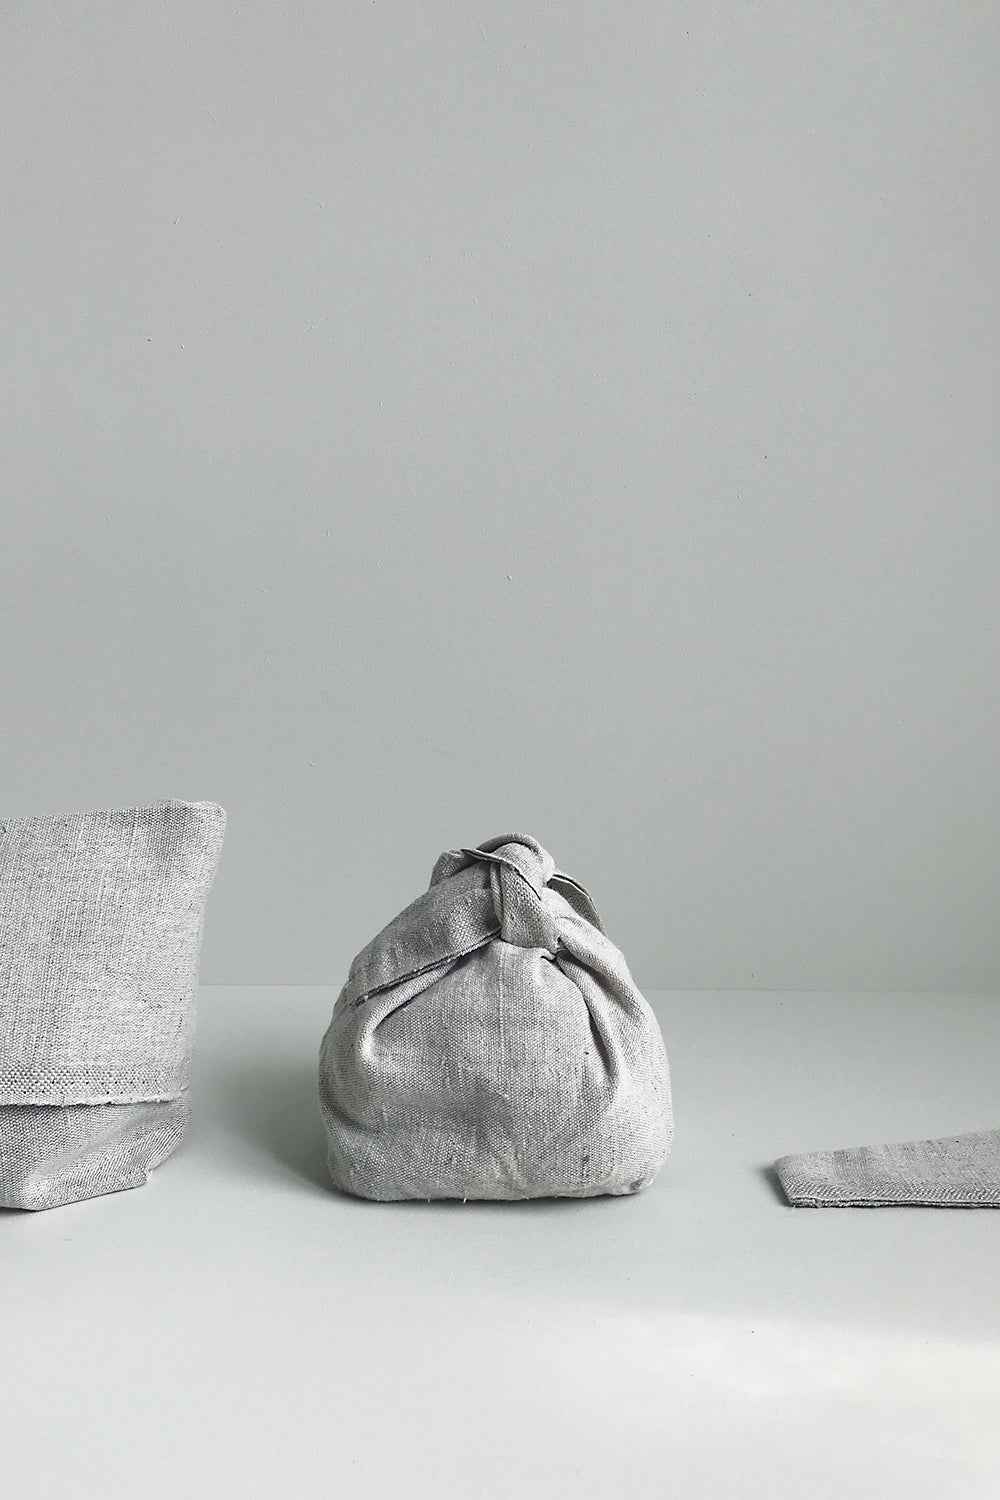 Linen storage bags on light background